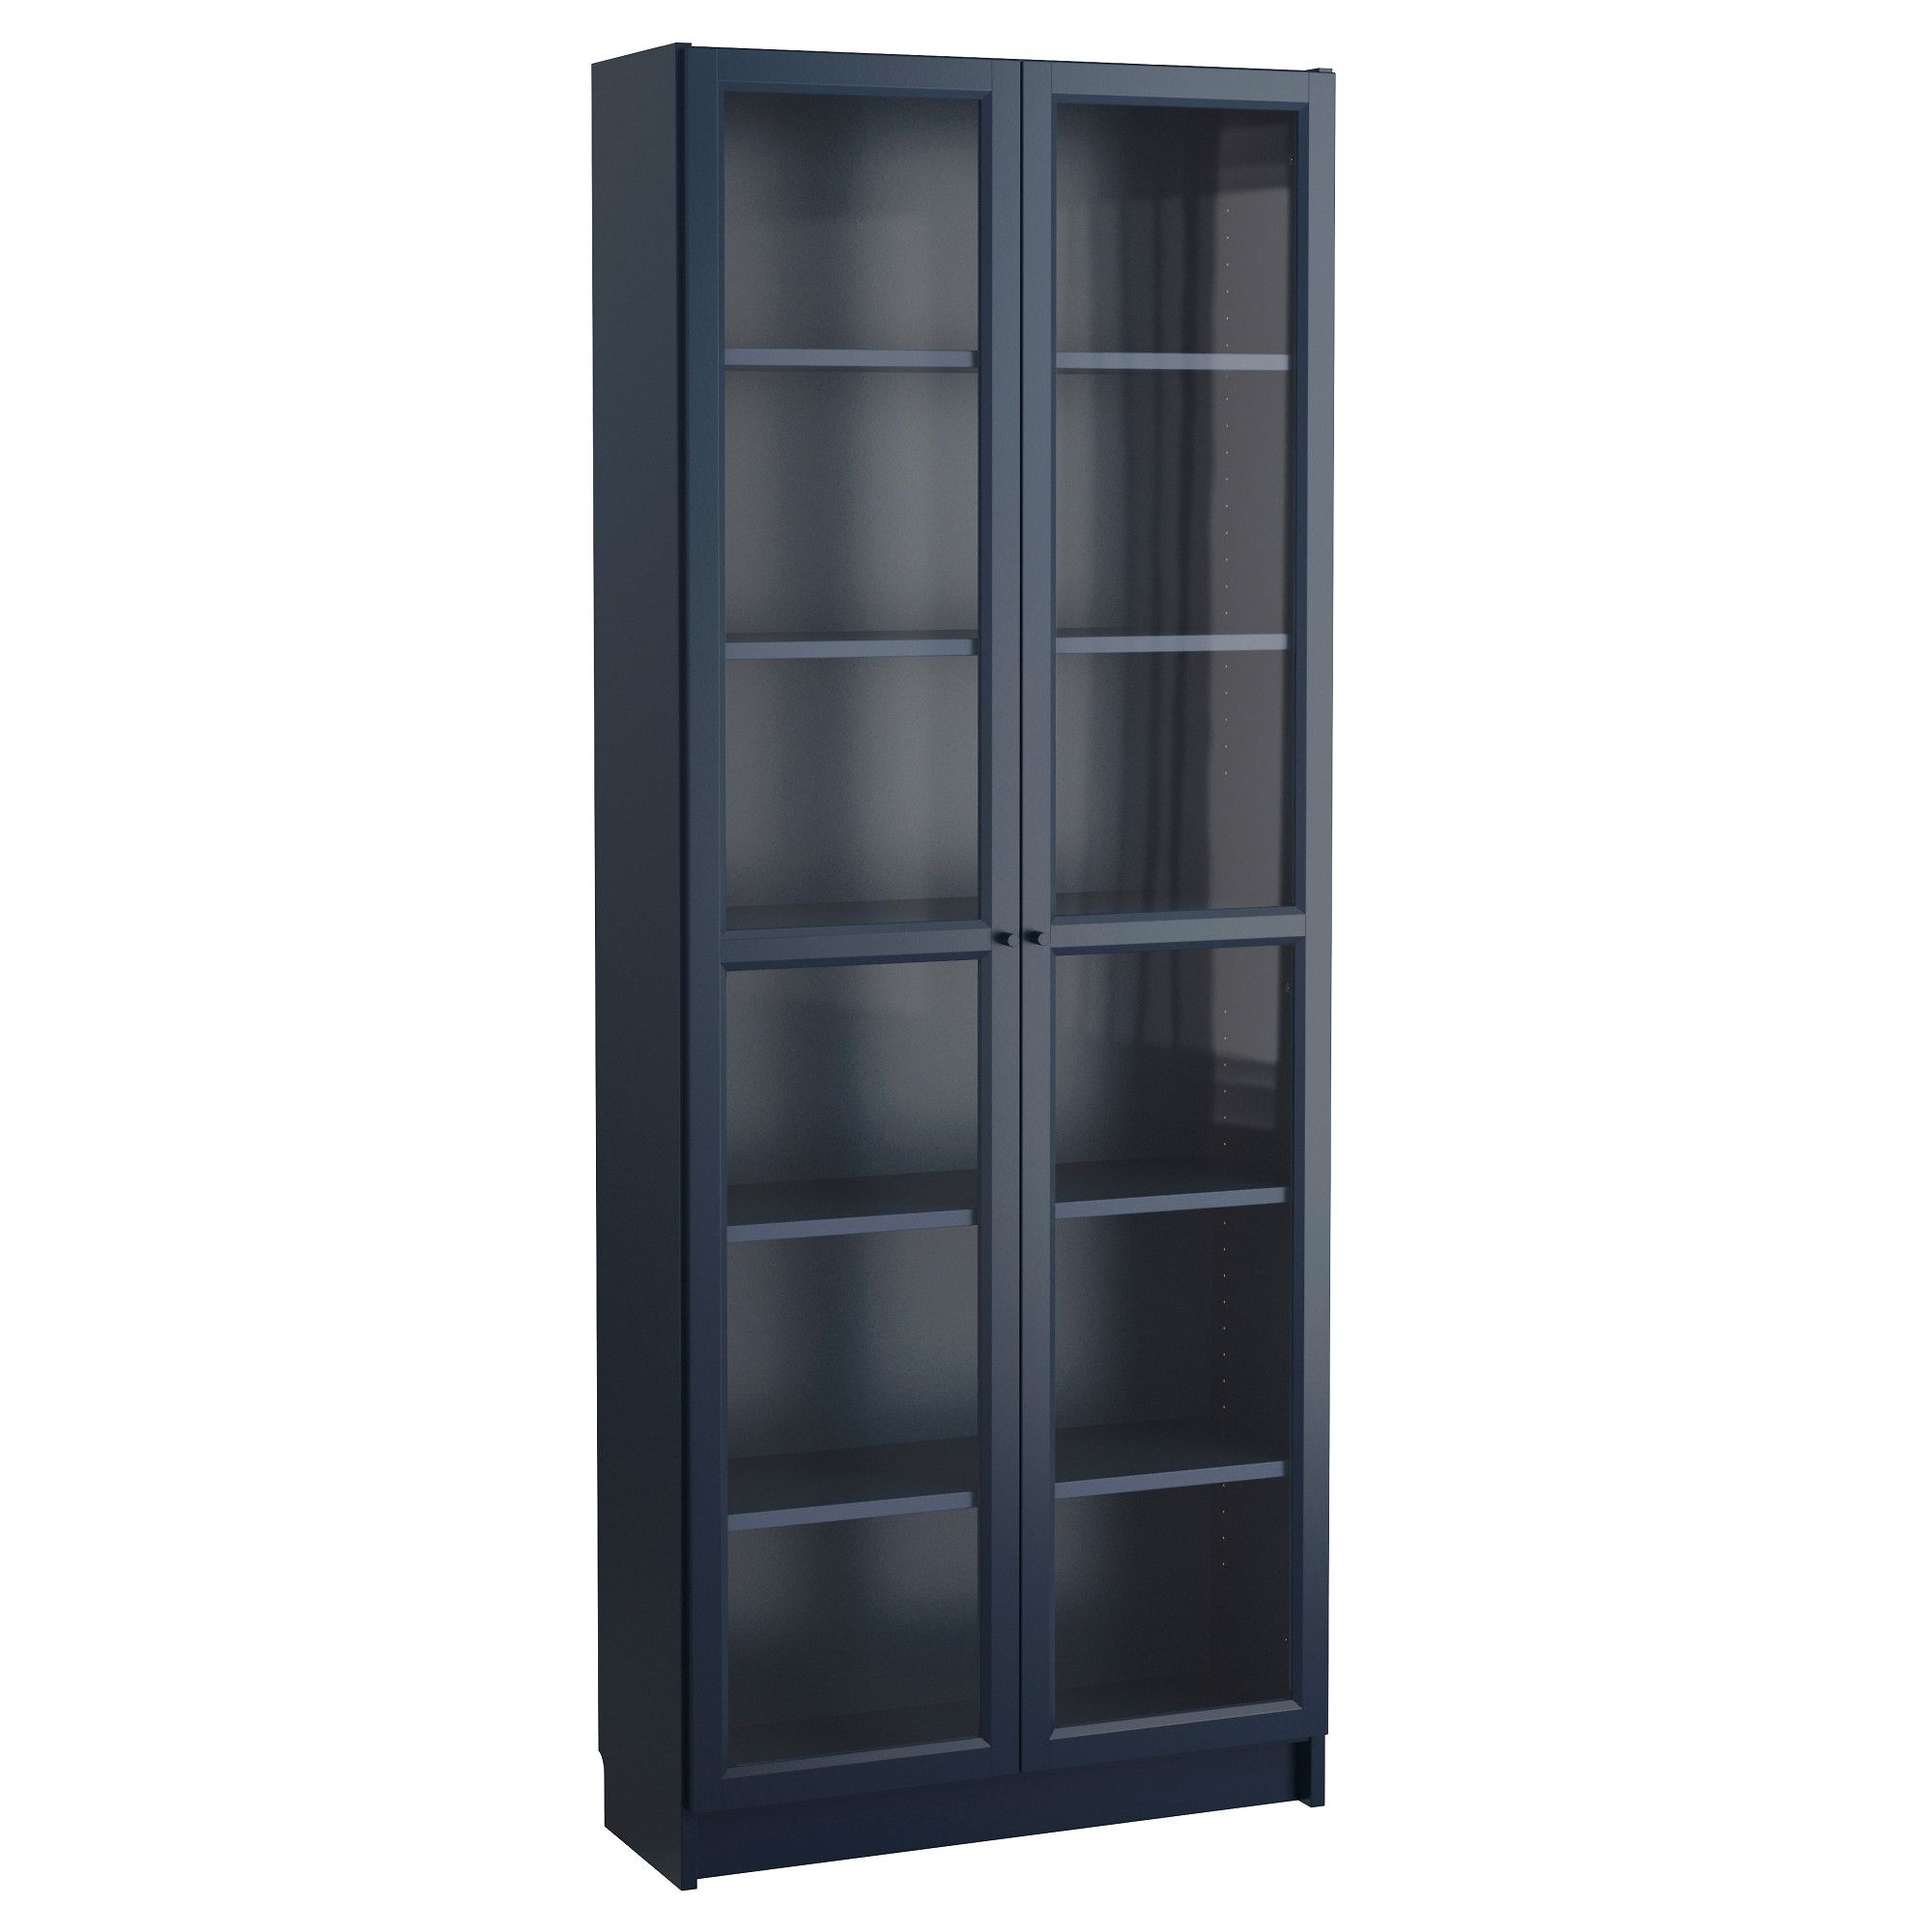 2018 Ikea Bookcases Pertaining To Billy Bookcase With Glass Doors – Dark Blue – Ikea (View 10 of 15)